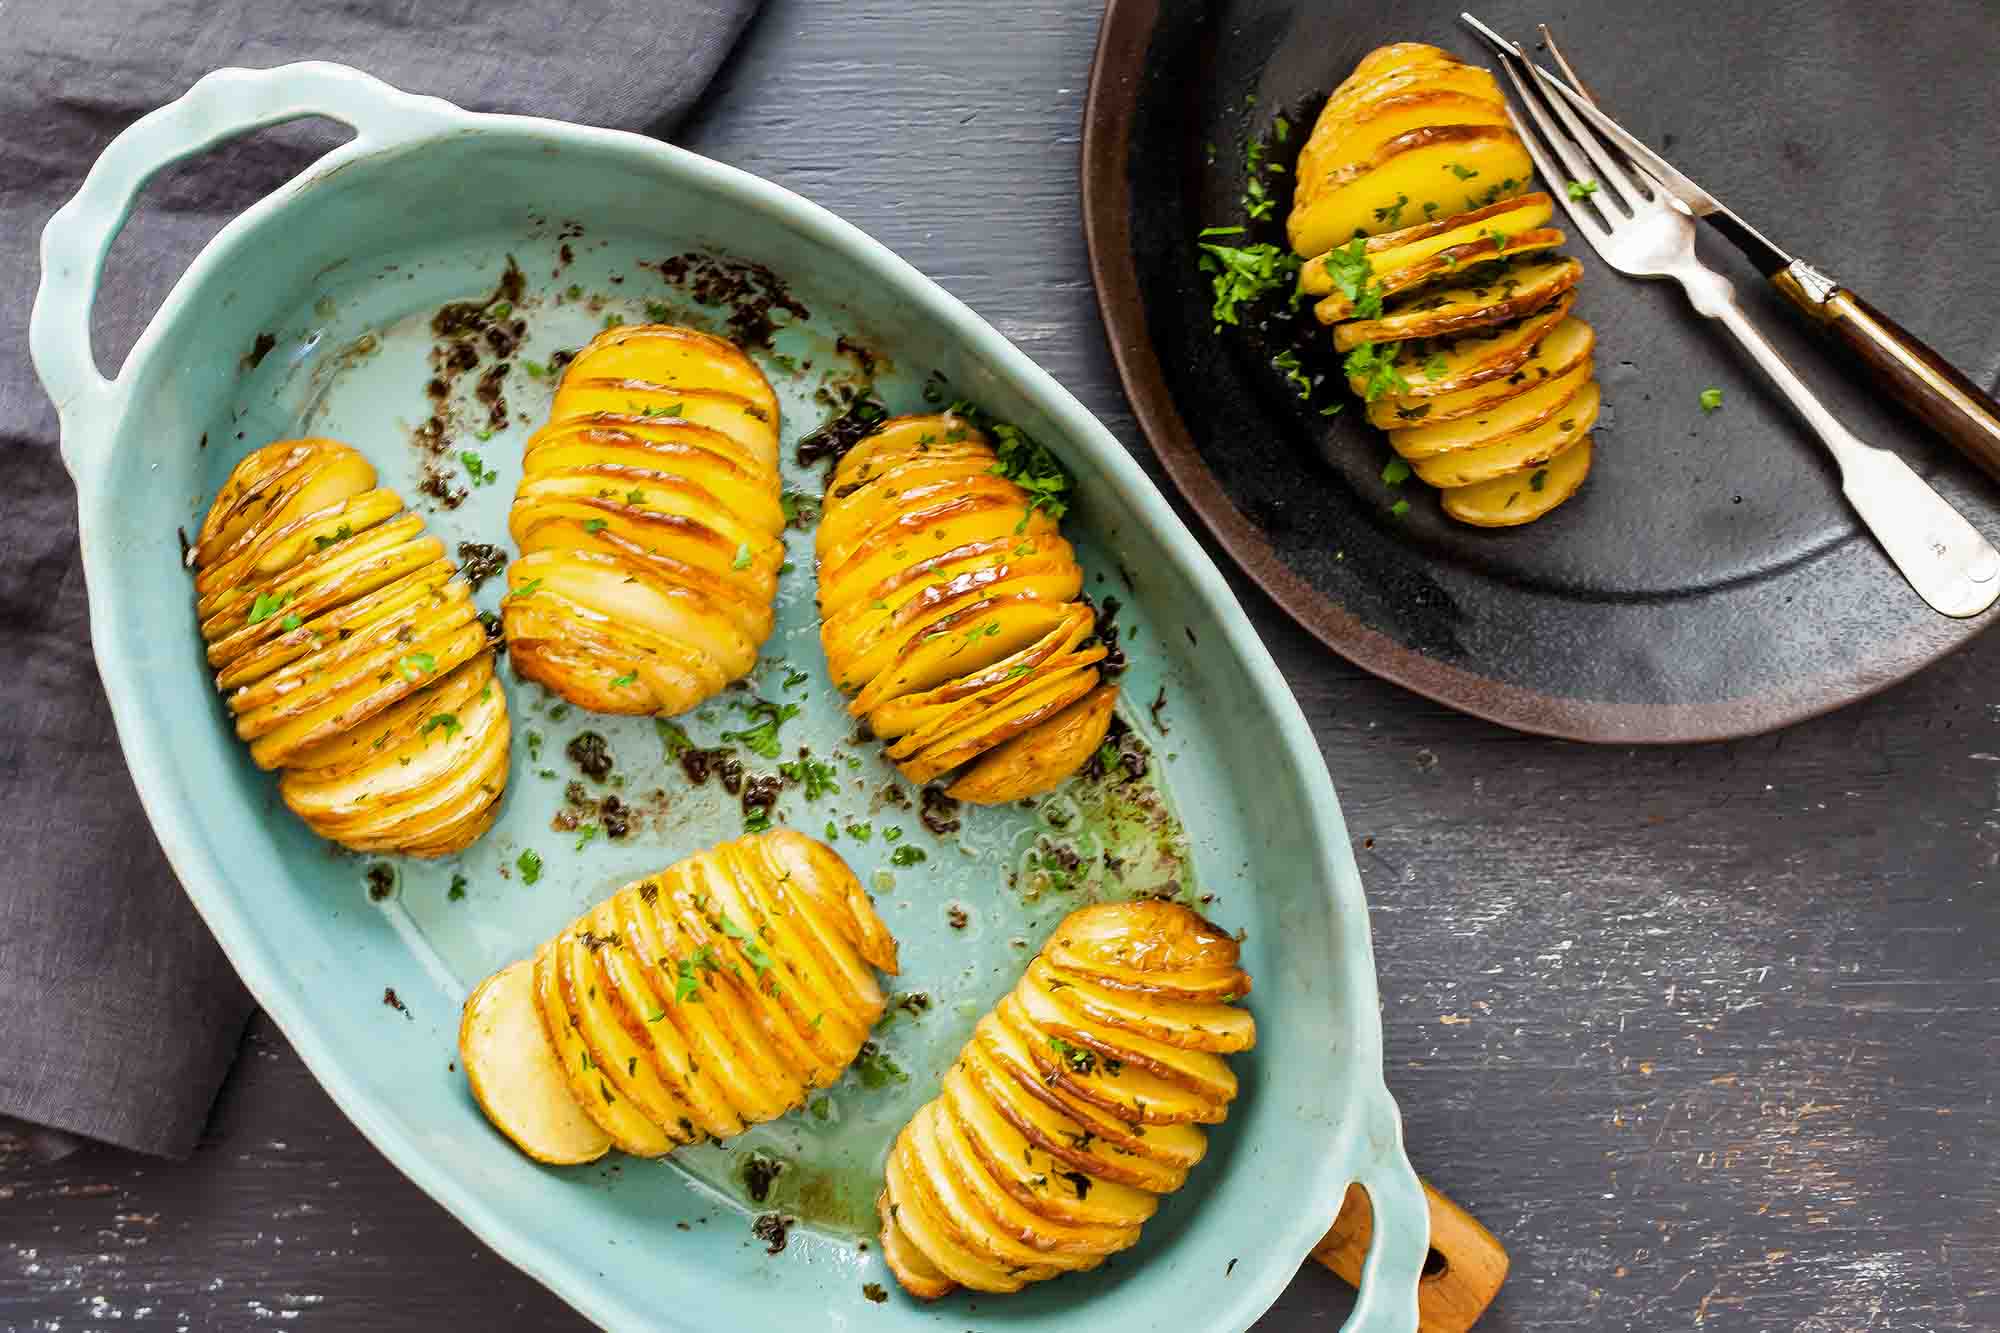 Hasselback potato recipe potatoes cut accordion style in a baking dish with herbs, butter, and olive oil.